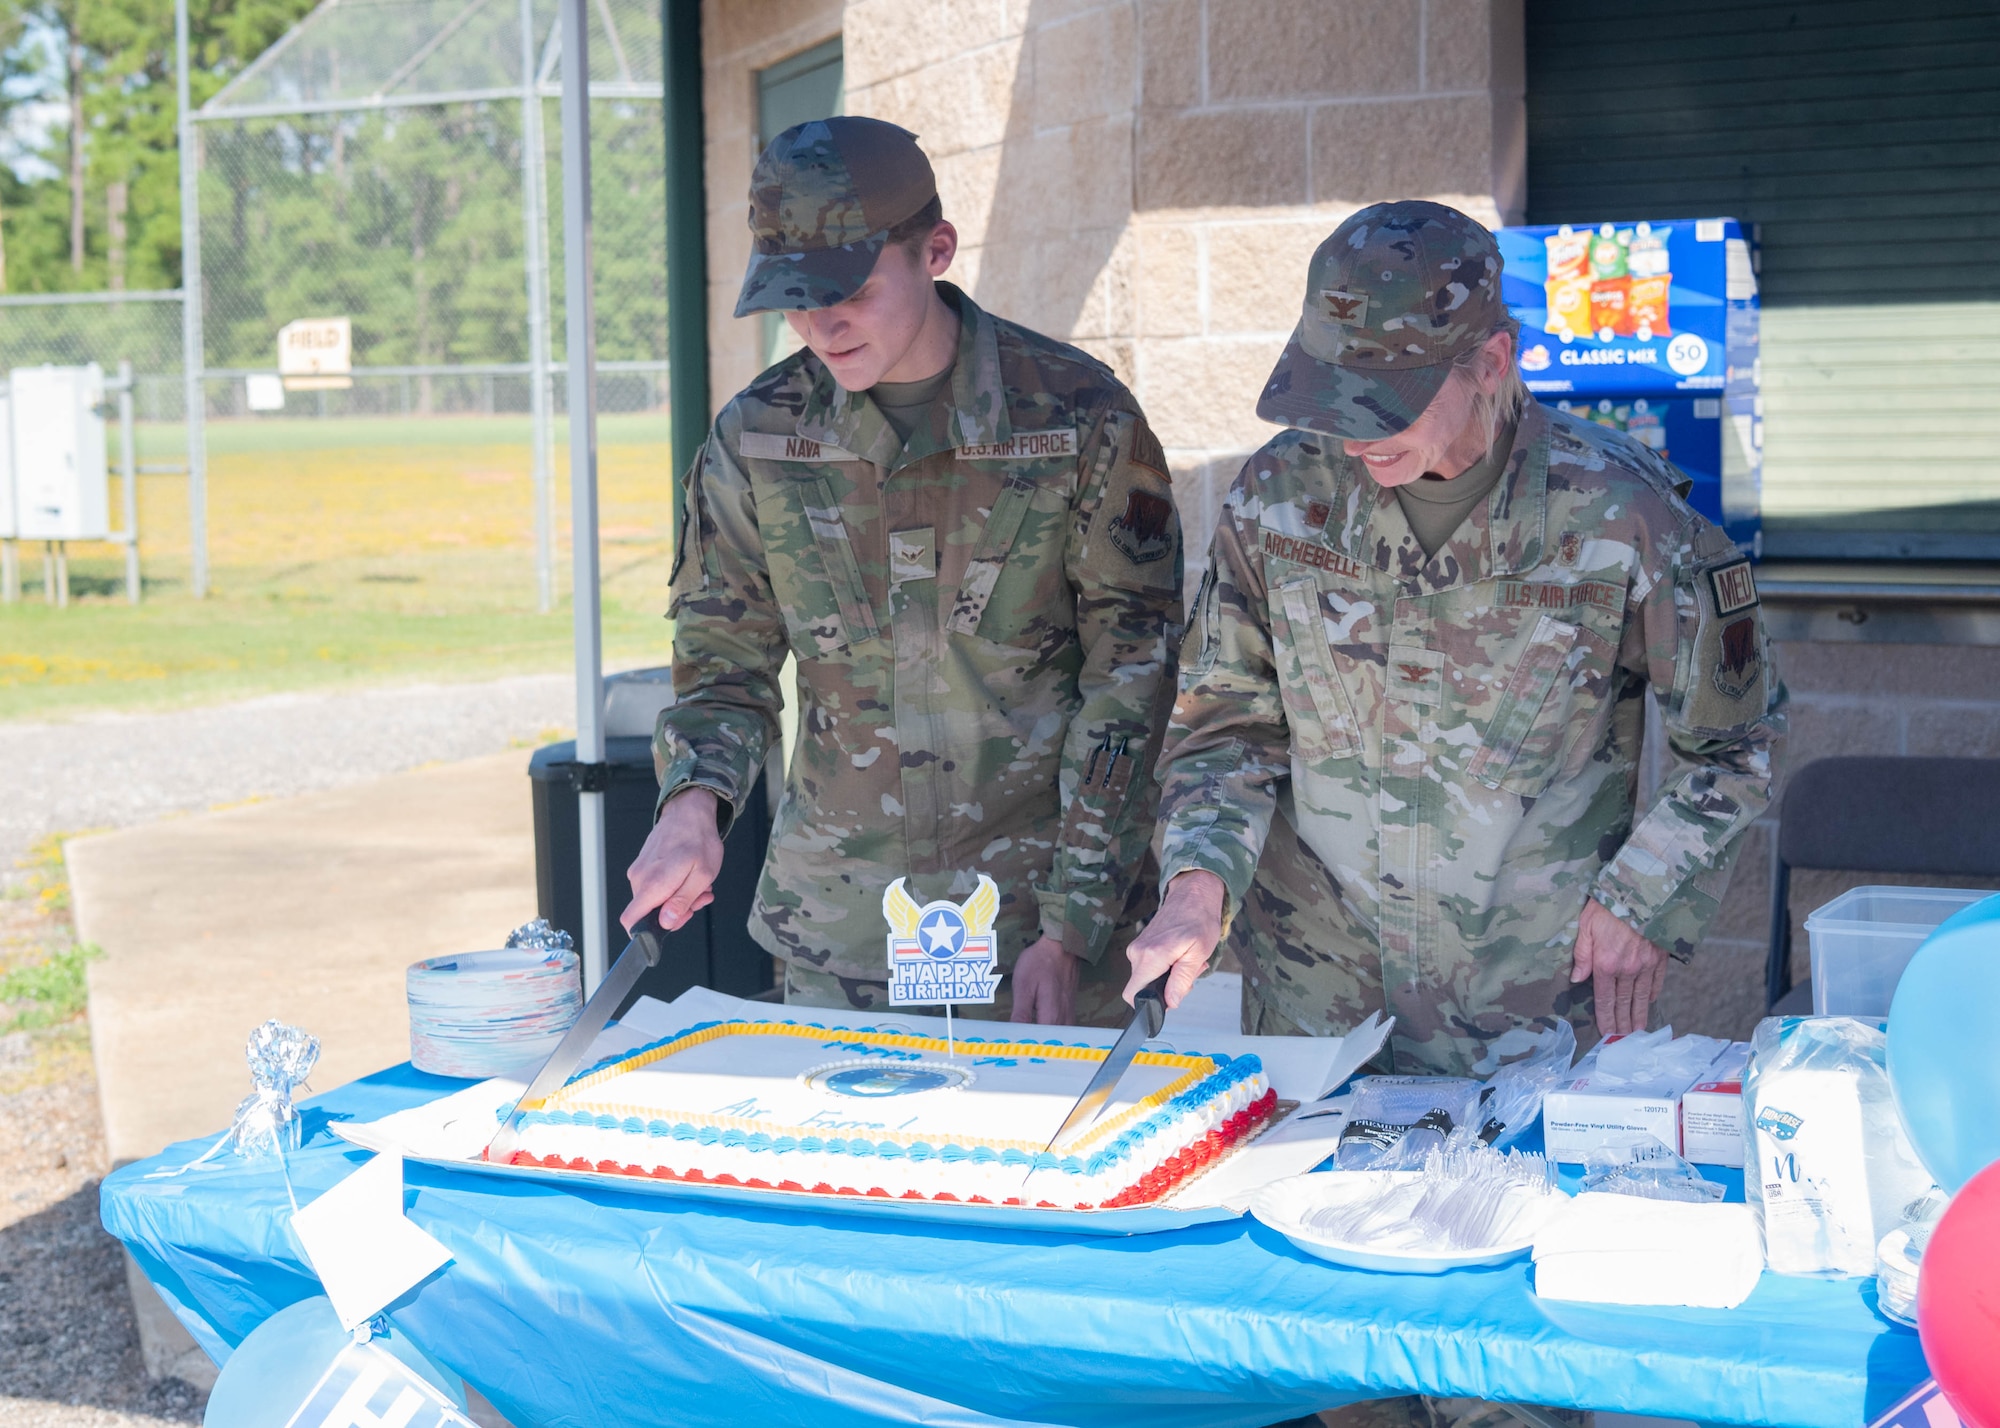 Two service members simultaneously cut a cake celebrating the 20th Fighter Wing Sports Day and the U.S. Air Force birthday.